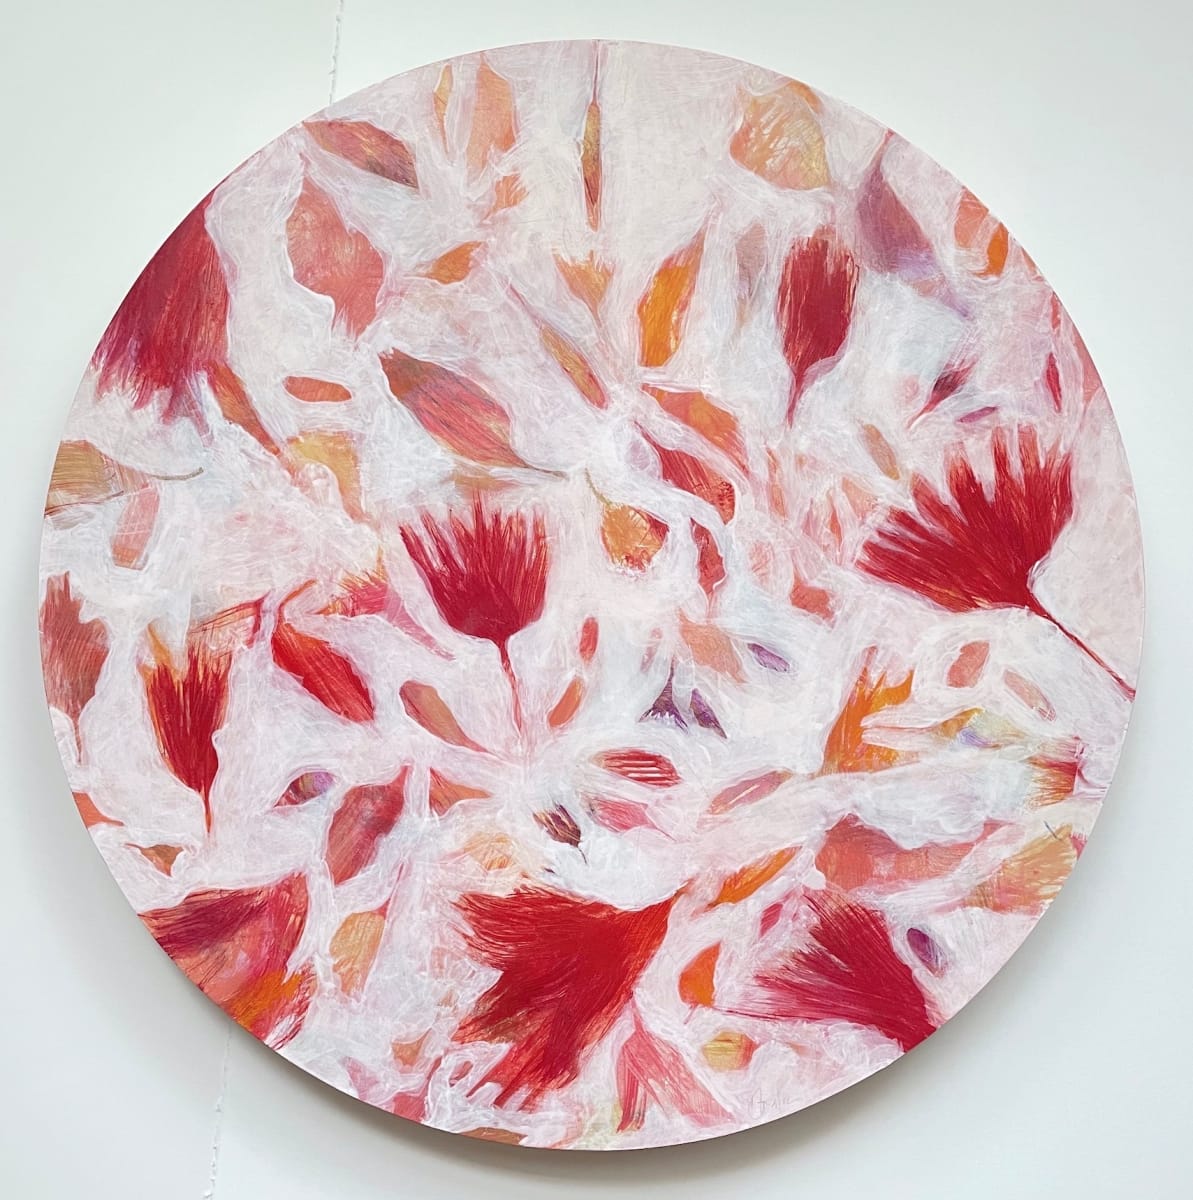 Fire Weed by Doris Wasserman  Image: Fire Weed. Acrylic, graphite, cold wax on panel. 22 inches